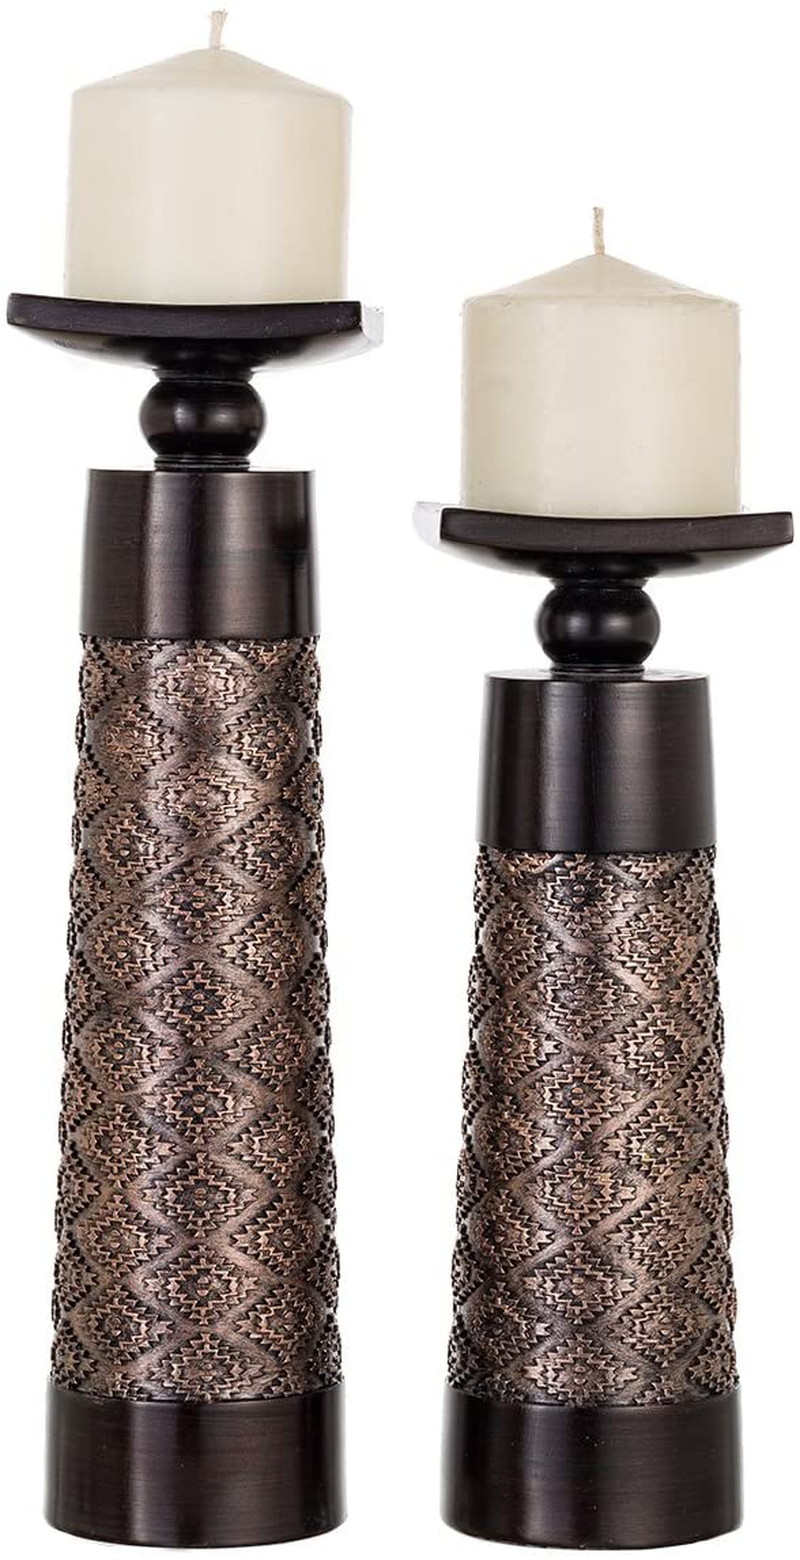 Dublin Decorative Candle Holder Set of 2 - Home Decor Pillar Candle Stand, Coffee Table Mantle Decor Centerpieces for Fireplace, Living or Dining Room Table, Gift Boxed (Coffee Brown)